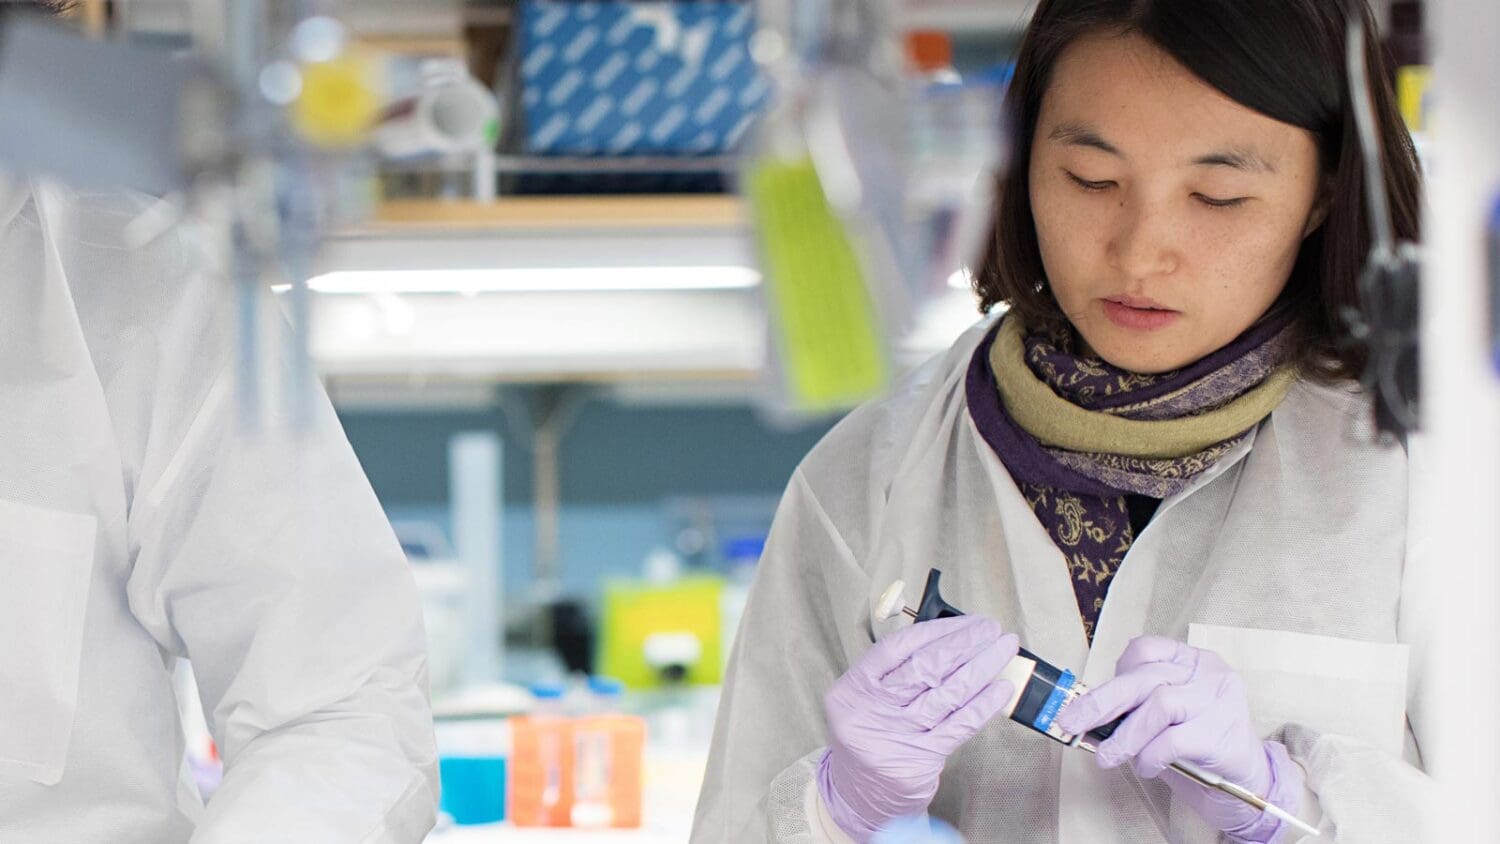 Two researchers in lab attire and gloves collaborating in a lab